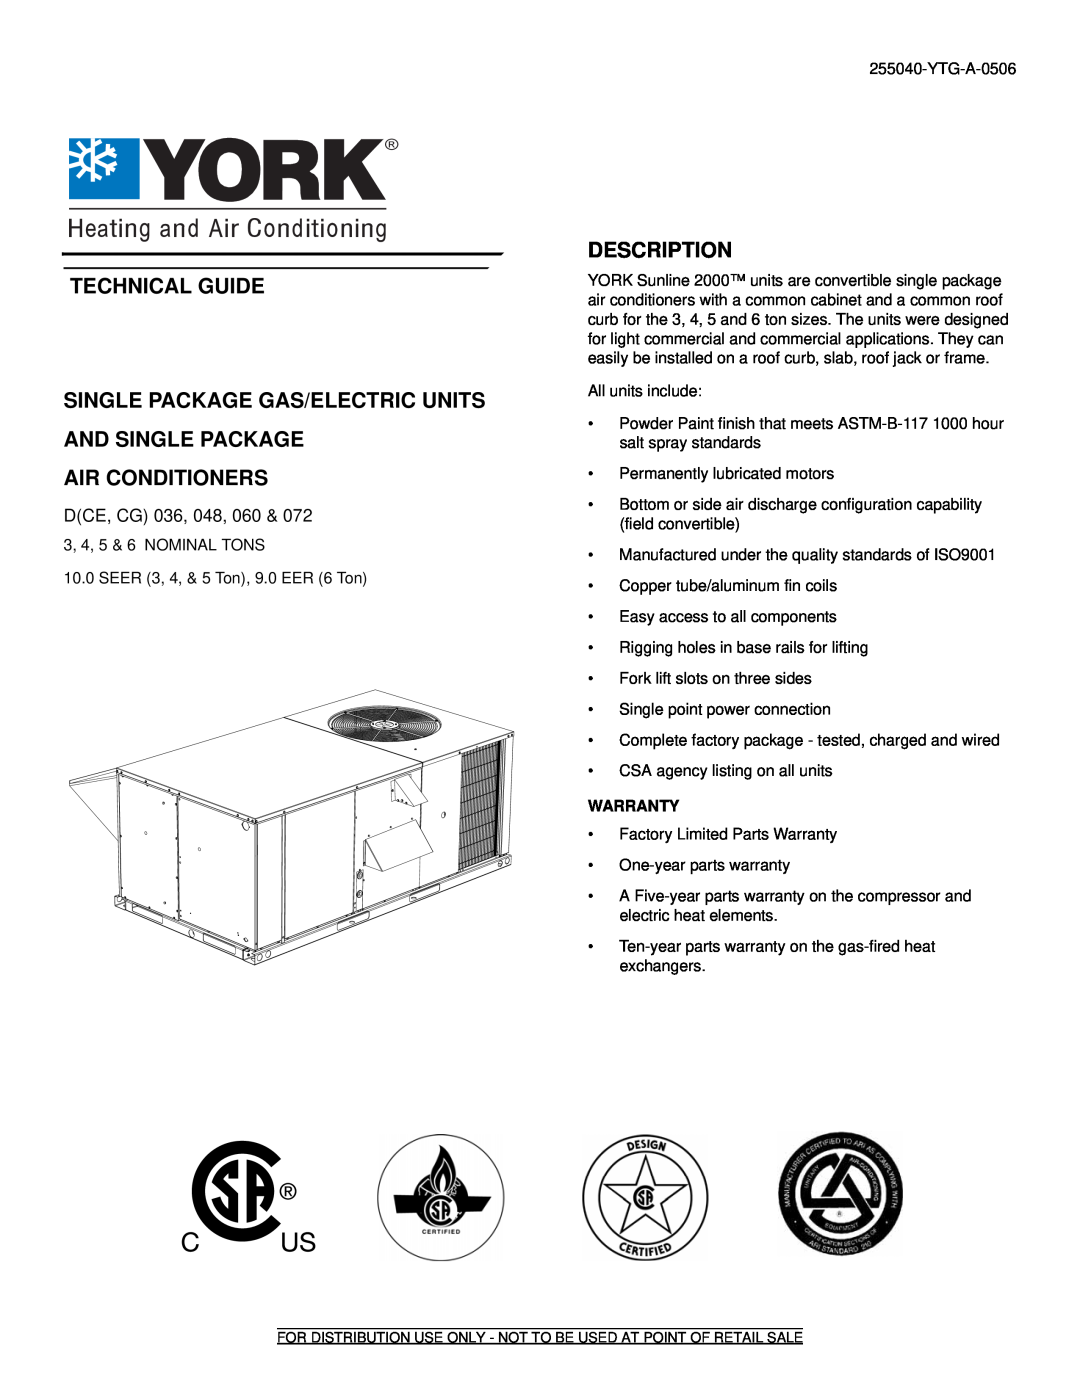 York 48, 60 warranty Description, Single Package Air-To-Air Heat Pumps, Features, Seer, Technical Guide, SUNLINE 2000 